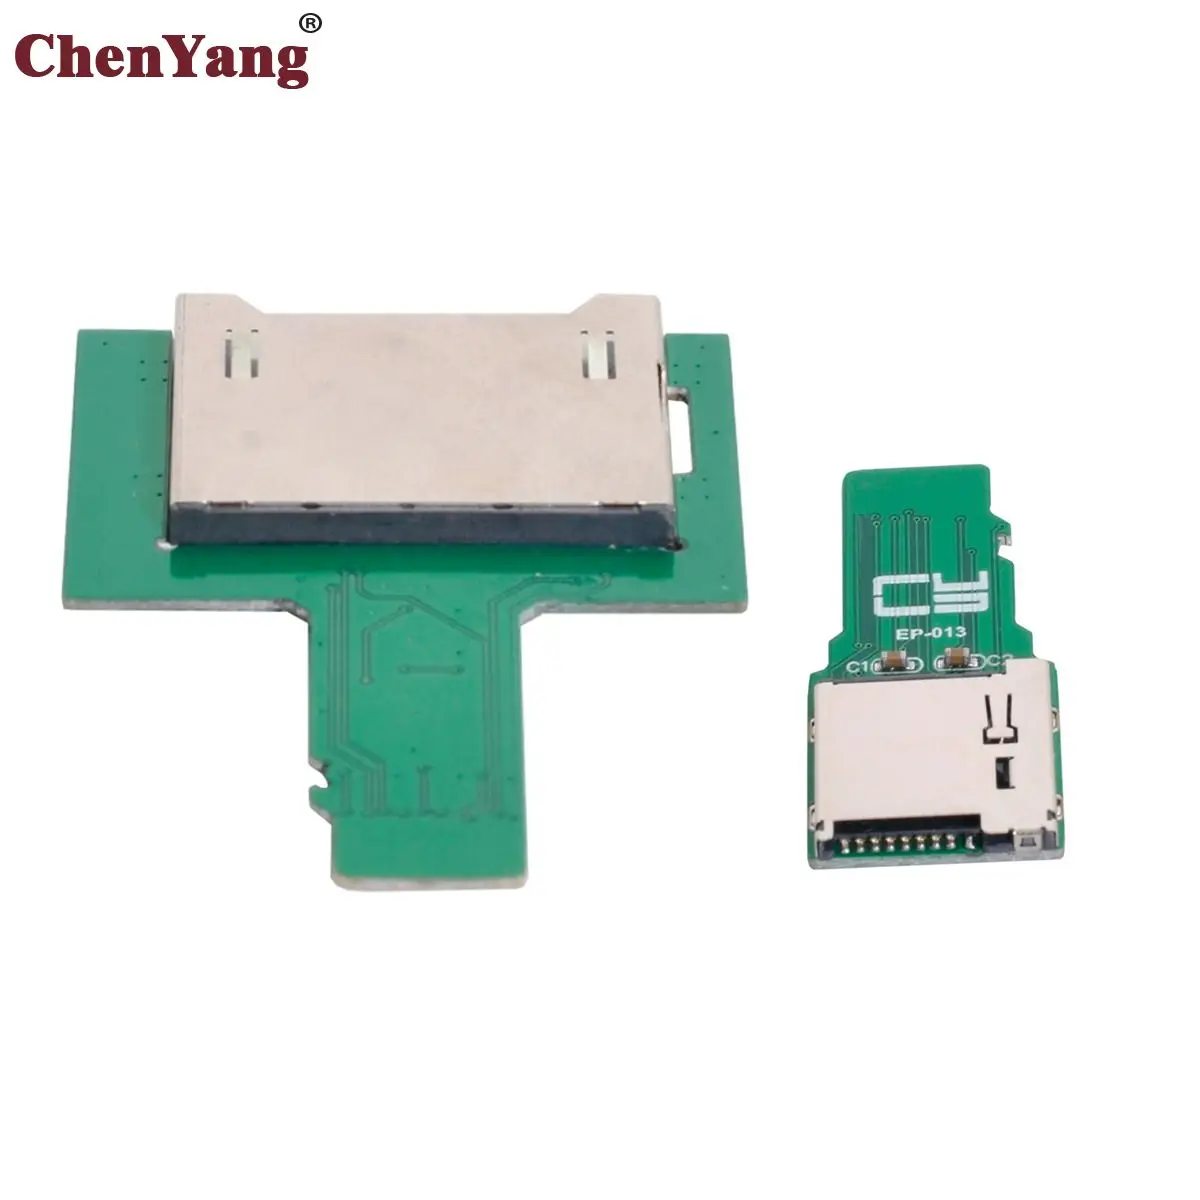 

Chenyang 2pcs TF Micro SD Male Extender to SD Card Female Extension Adapter PCBA SD/SDHC/SDXC UHS-III UHS-3 UHS-2